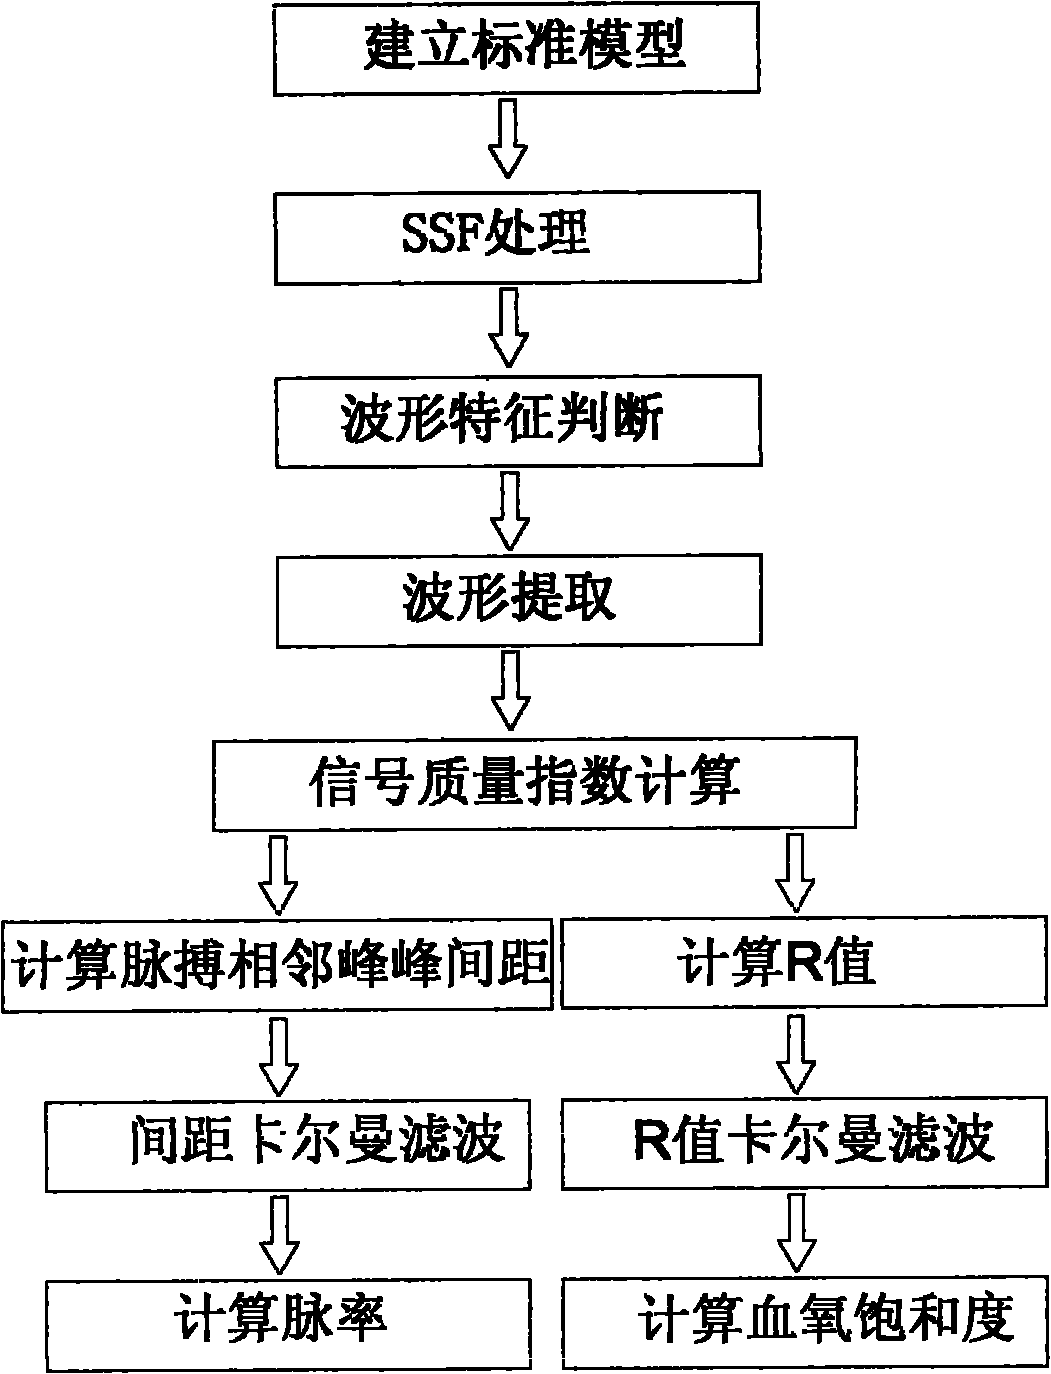 Oxyhemoglobin saturation detection method and system